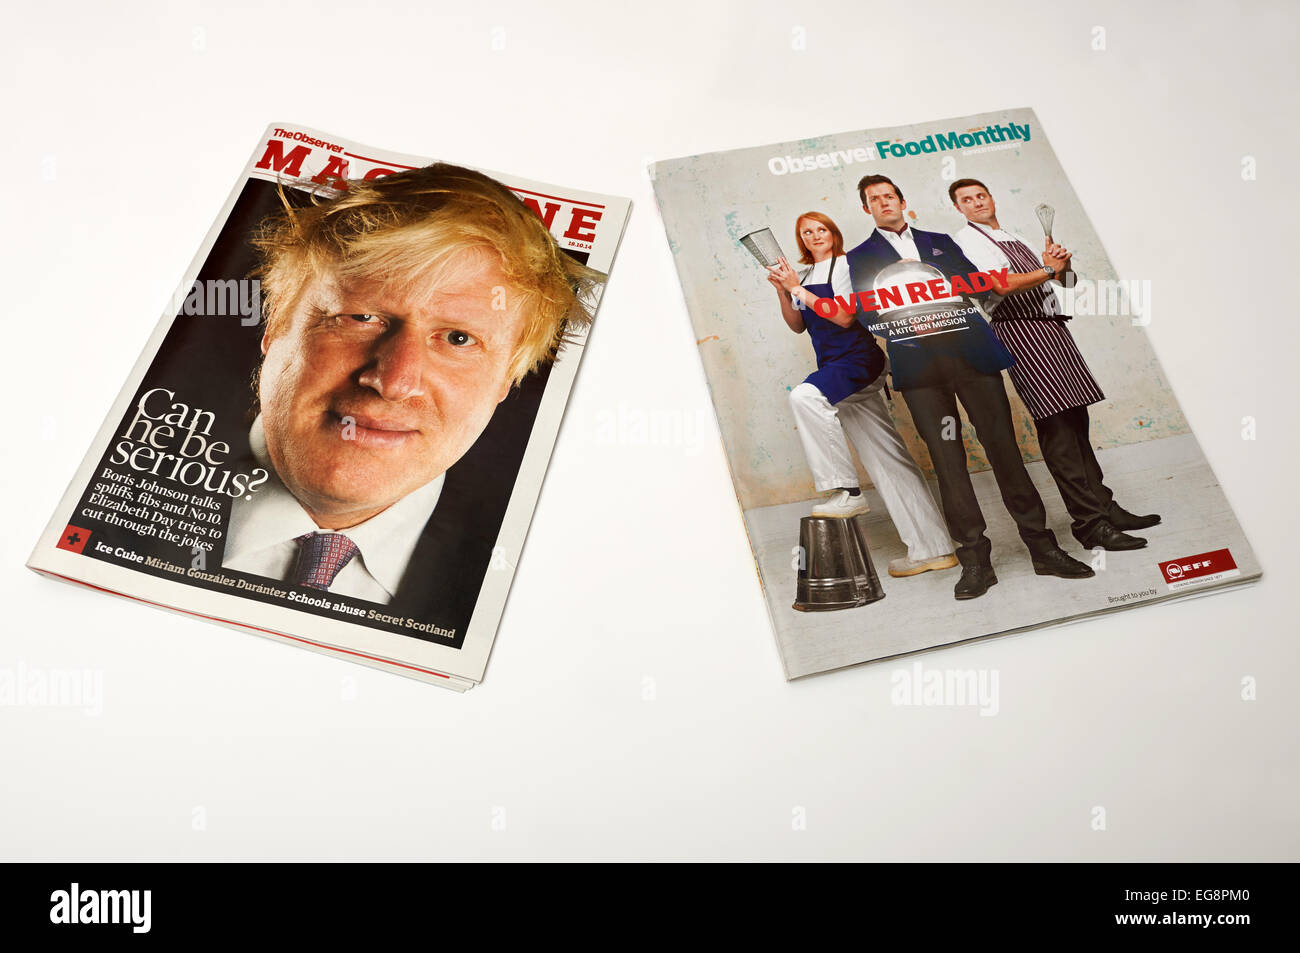 The Observer magazine and Food Monthly magazine Stock Photo